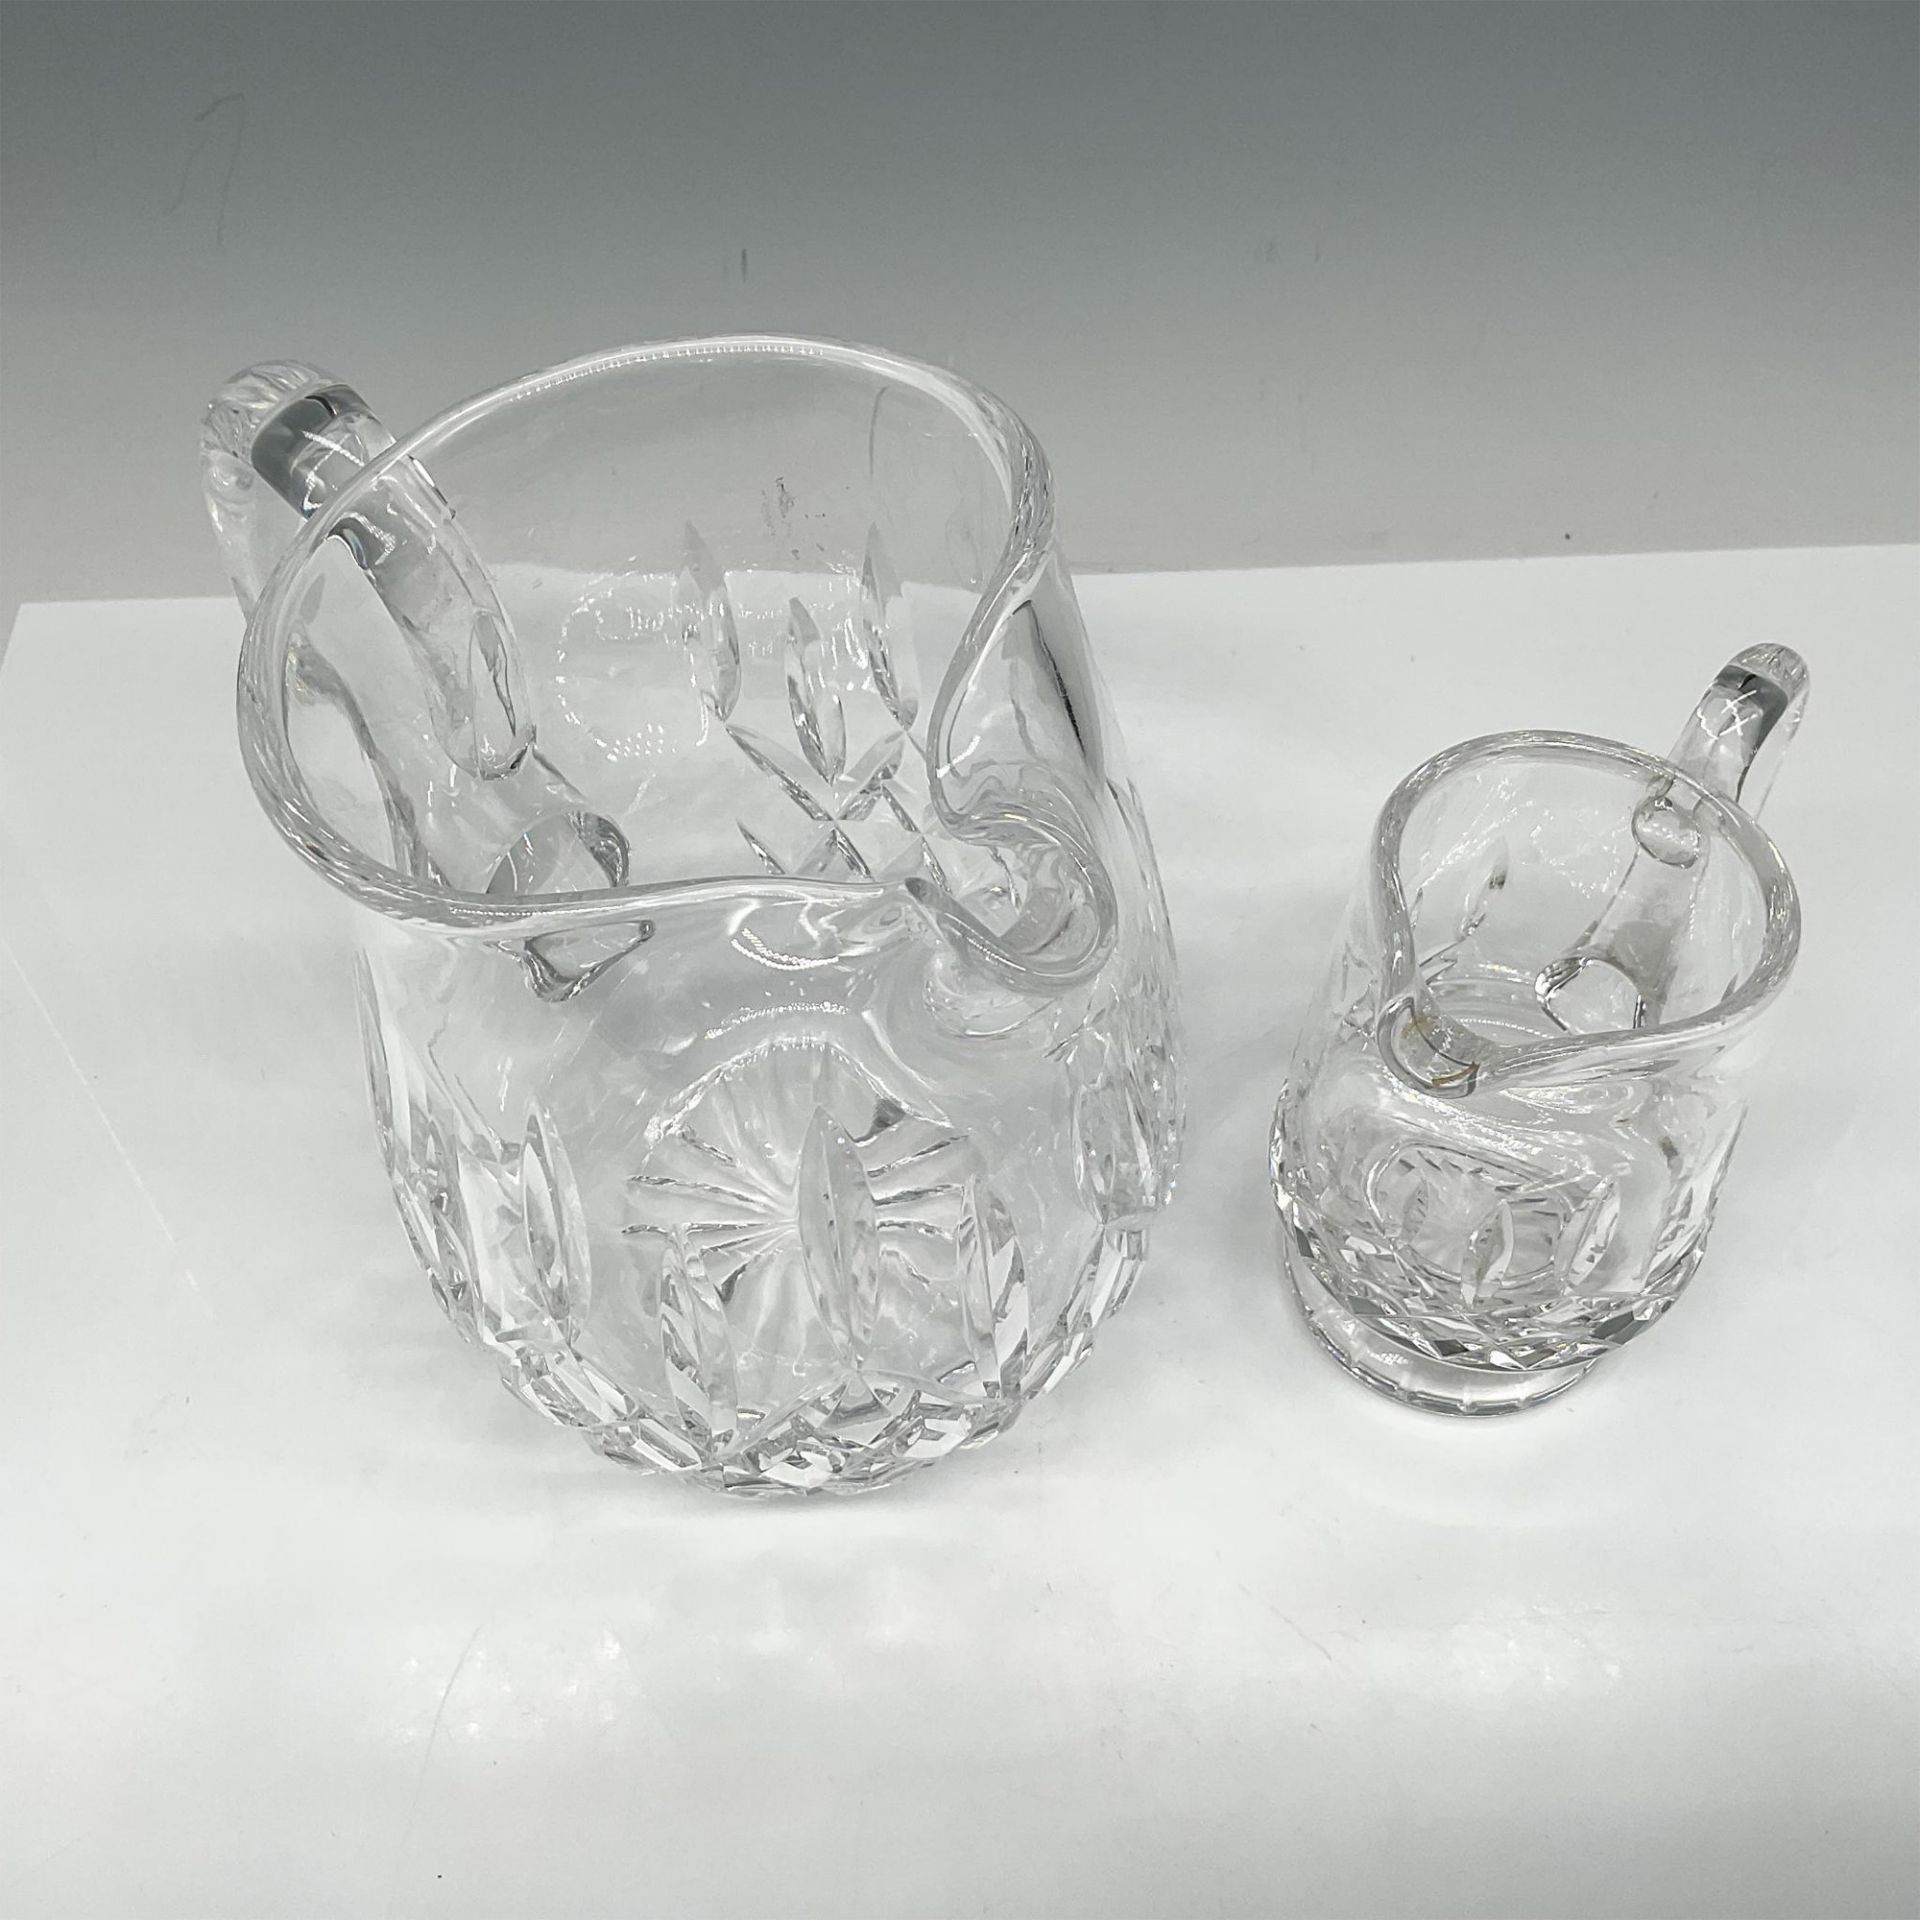 2pc Waterford Crystal Pitcher and Cream Jug - Image 2 of 3